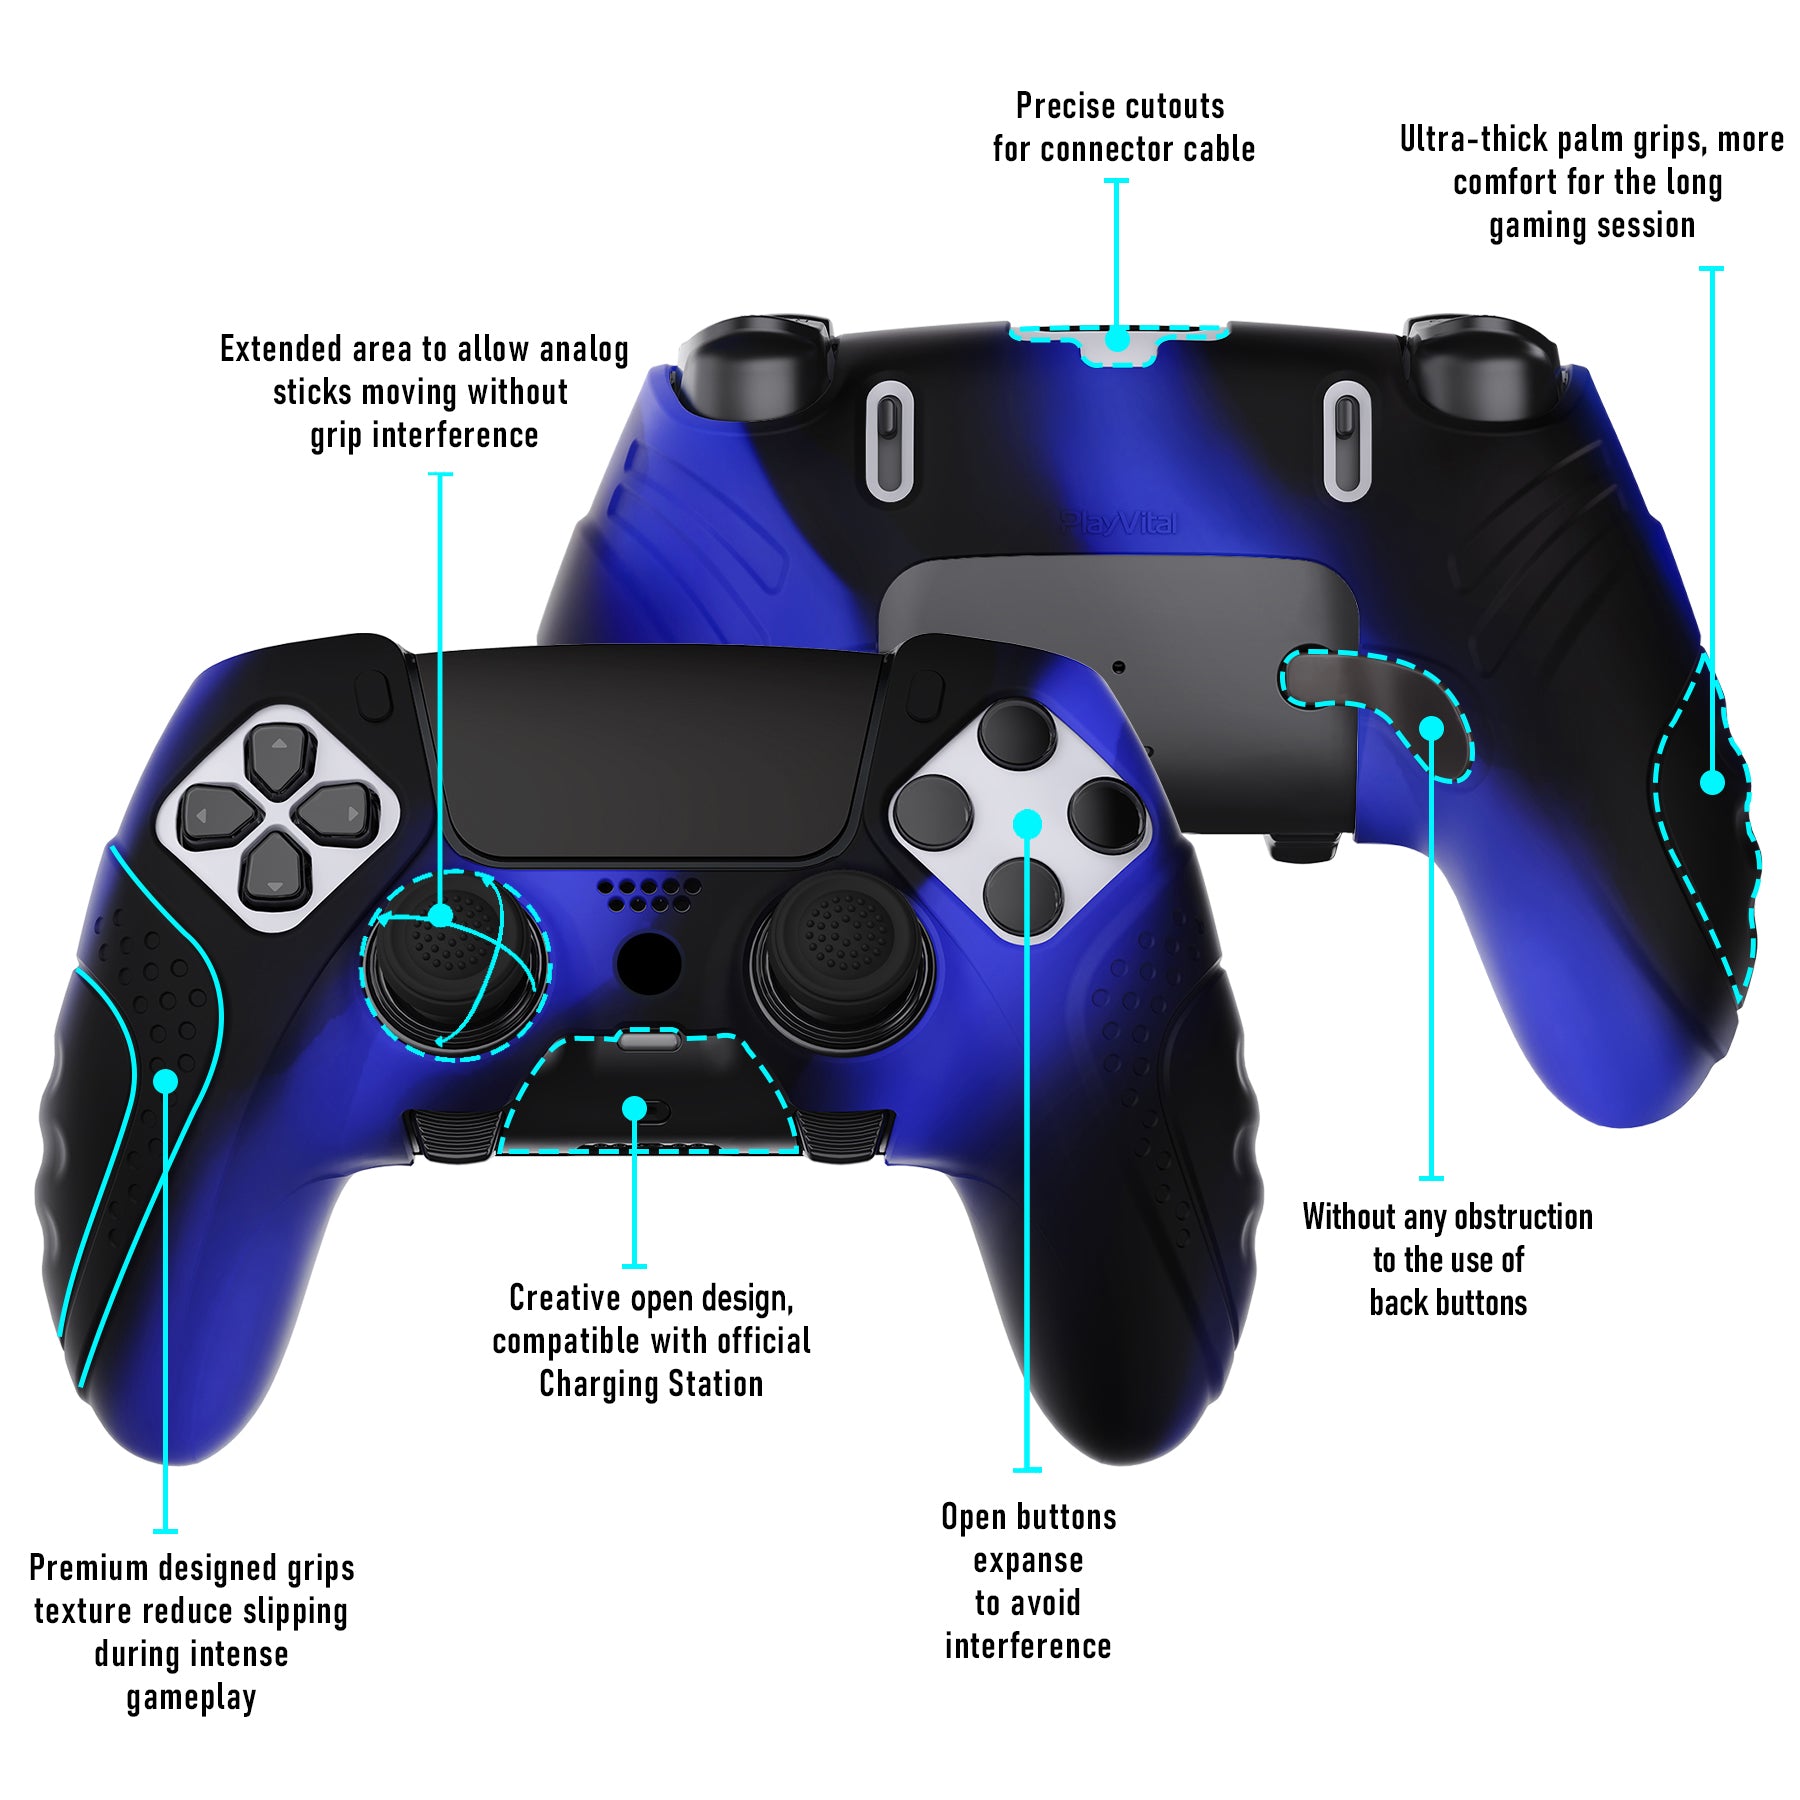 PlayVital Guardian Edition Anti-Slip Ergonomic Silicone Cover Case with Thumb Grip Caps for PS5 Edge Controller - Blue & Black - EHPFP009 PlayVital